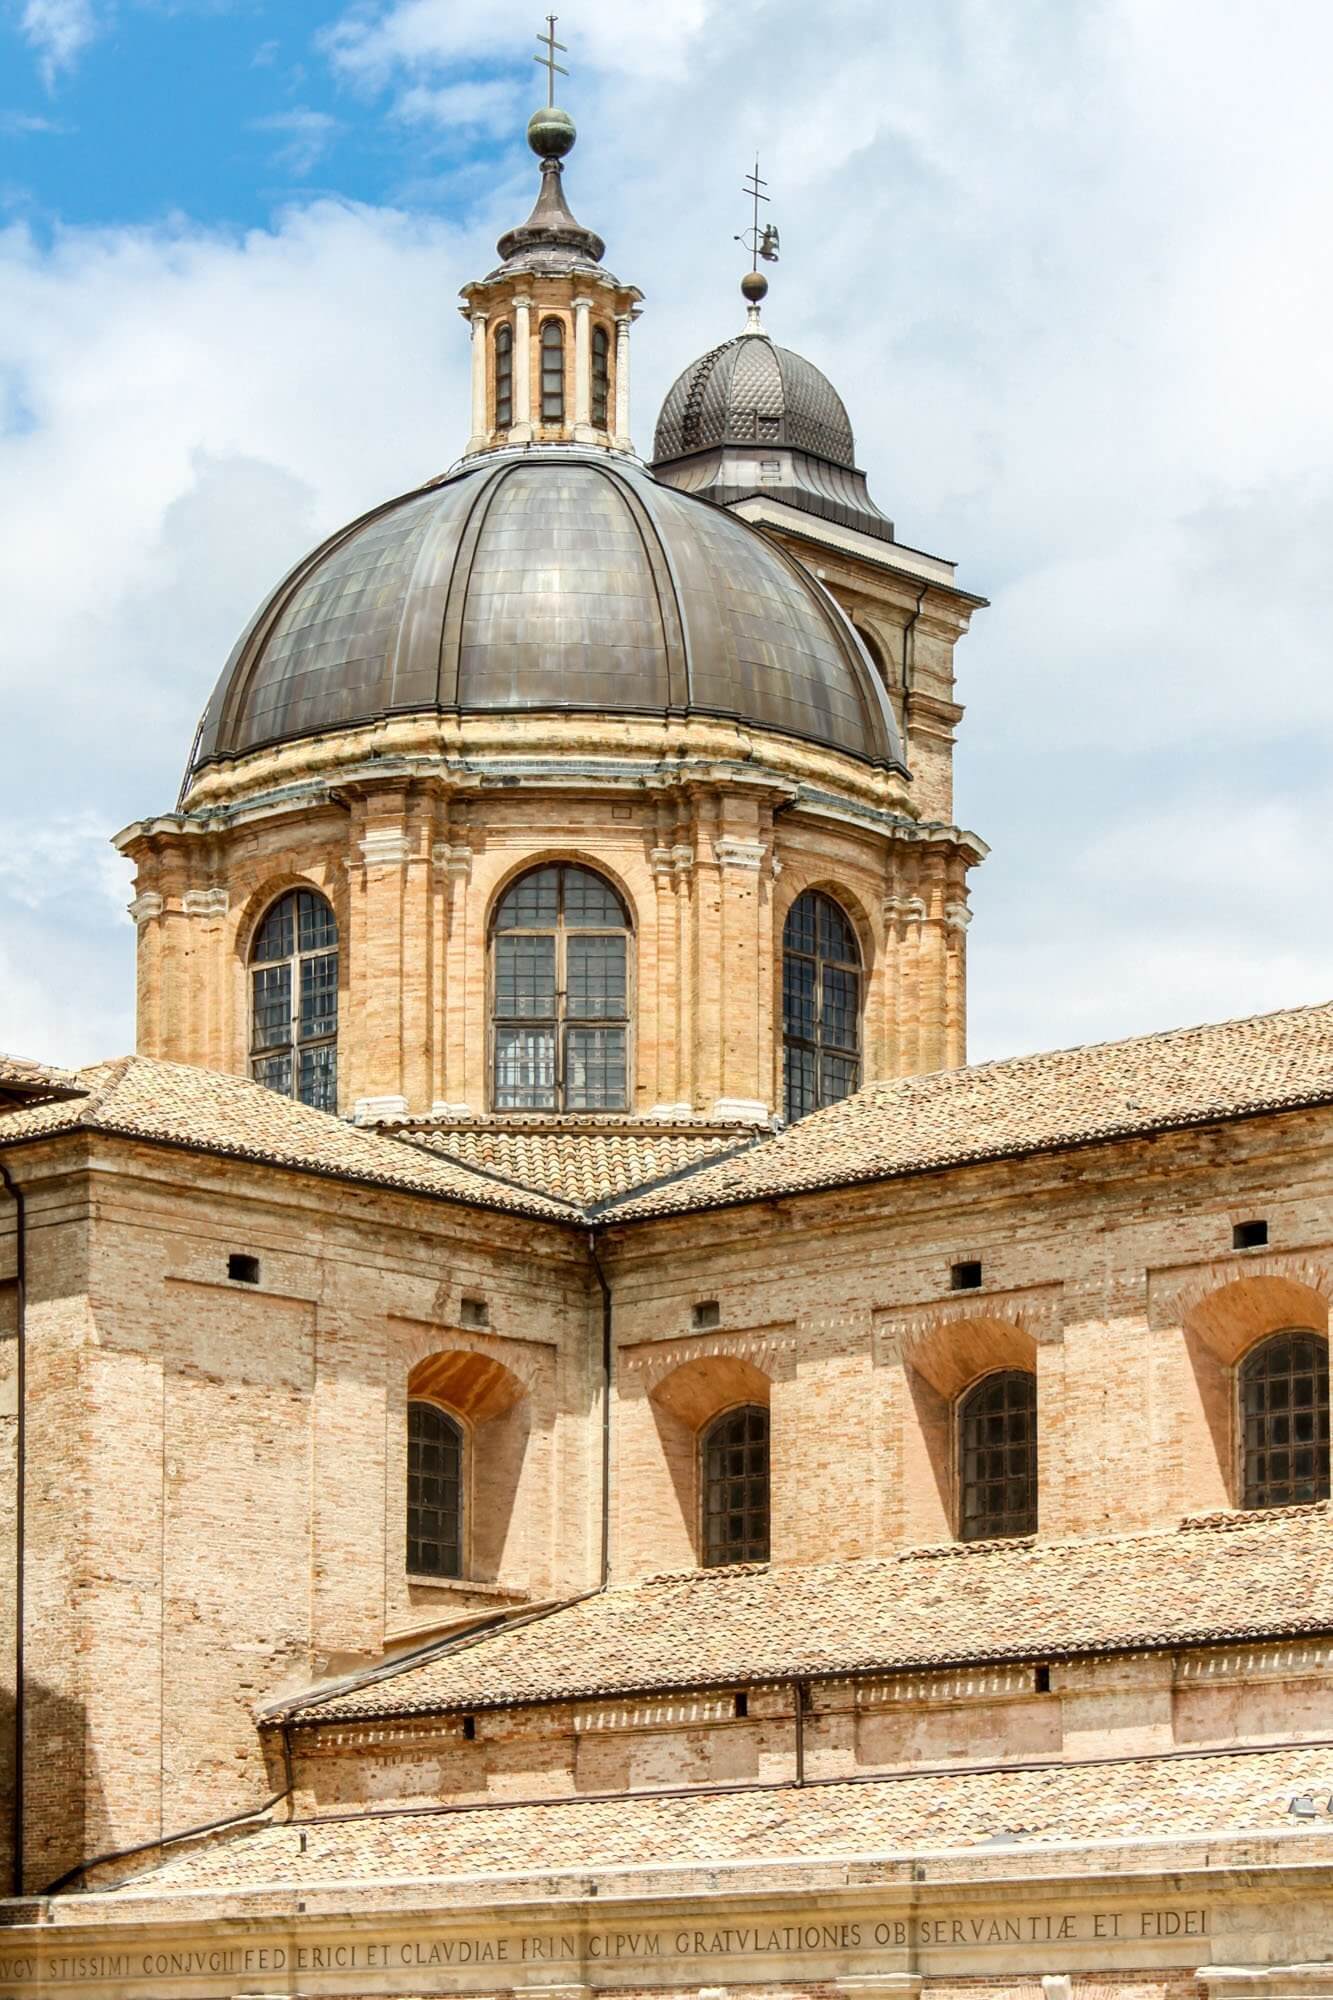 Close-up of the dome of the Urbino Cathedral